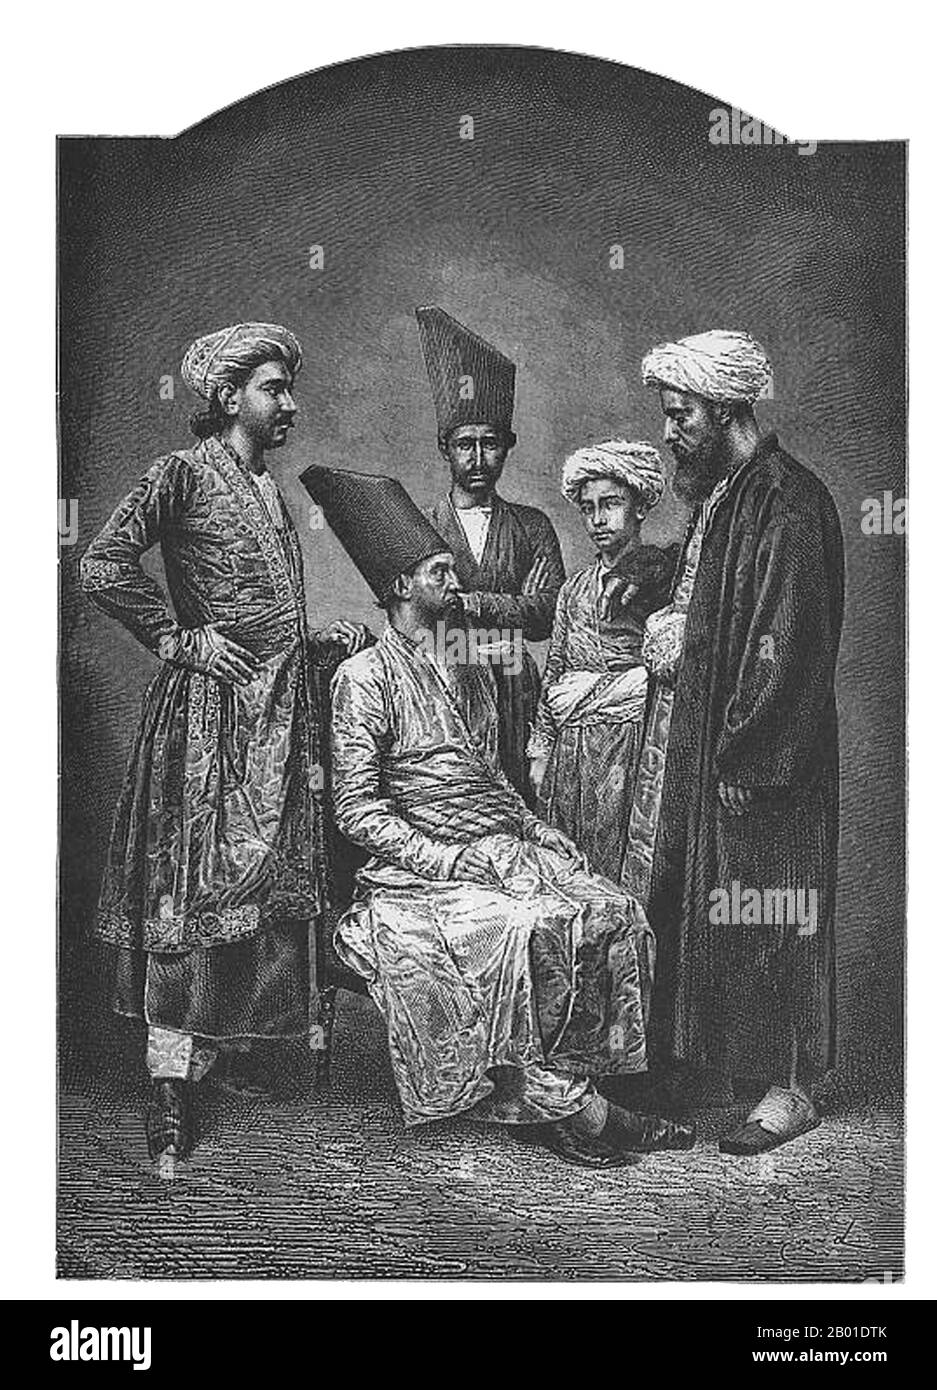 India: 'Parsees of Bombay'. Wood engraving from a drawing by Emile Antoine Bayard (1837-1891), c. 1878.  The collapse of the Persian Sassanid Empire in the 7th century CE caused the state religion to be switched from Zoroastrianism to Islam. Zoroastrianism slowly went from the religion of most in Iran, to a persecuted minority.  For the survival of their faith and their lives, a large number of Zoroastrians chose to emigrate. According to the Qissa-i Sanjan, one group of those refugees landed in what is now Gujarat, India, where they were allowed greater freedom to observe their old customs. Stock Photo